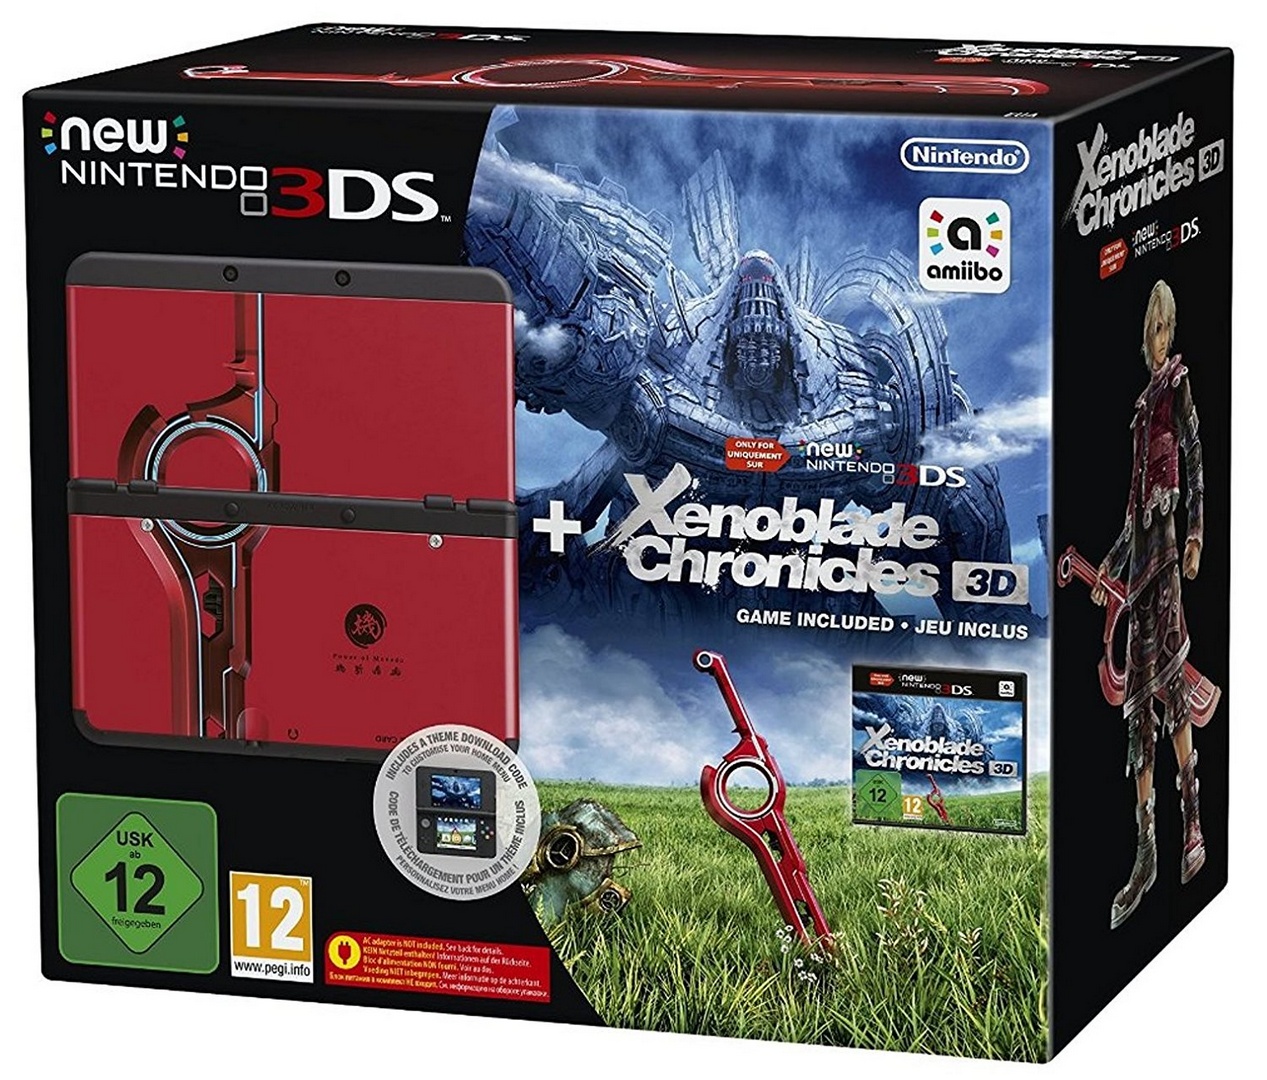 New 3DS - Black incl. Xenoblade Chronicles 3D and Faceplate